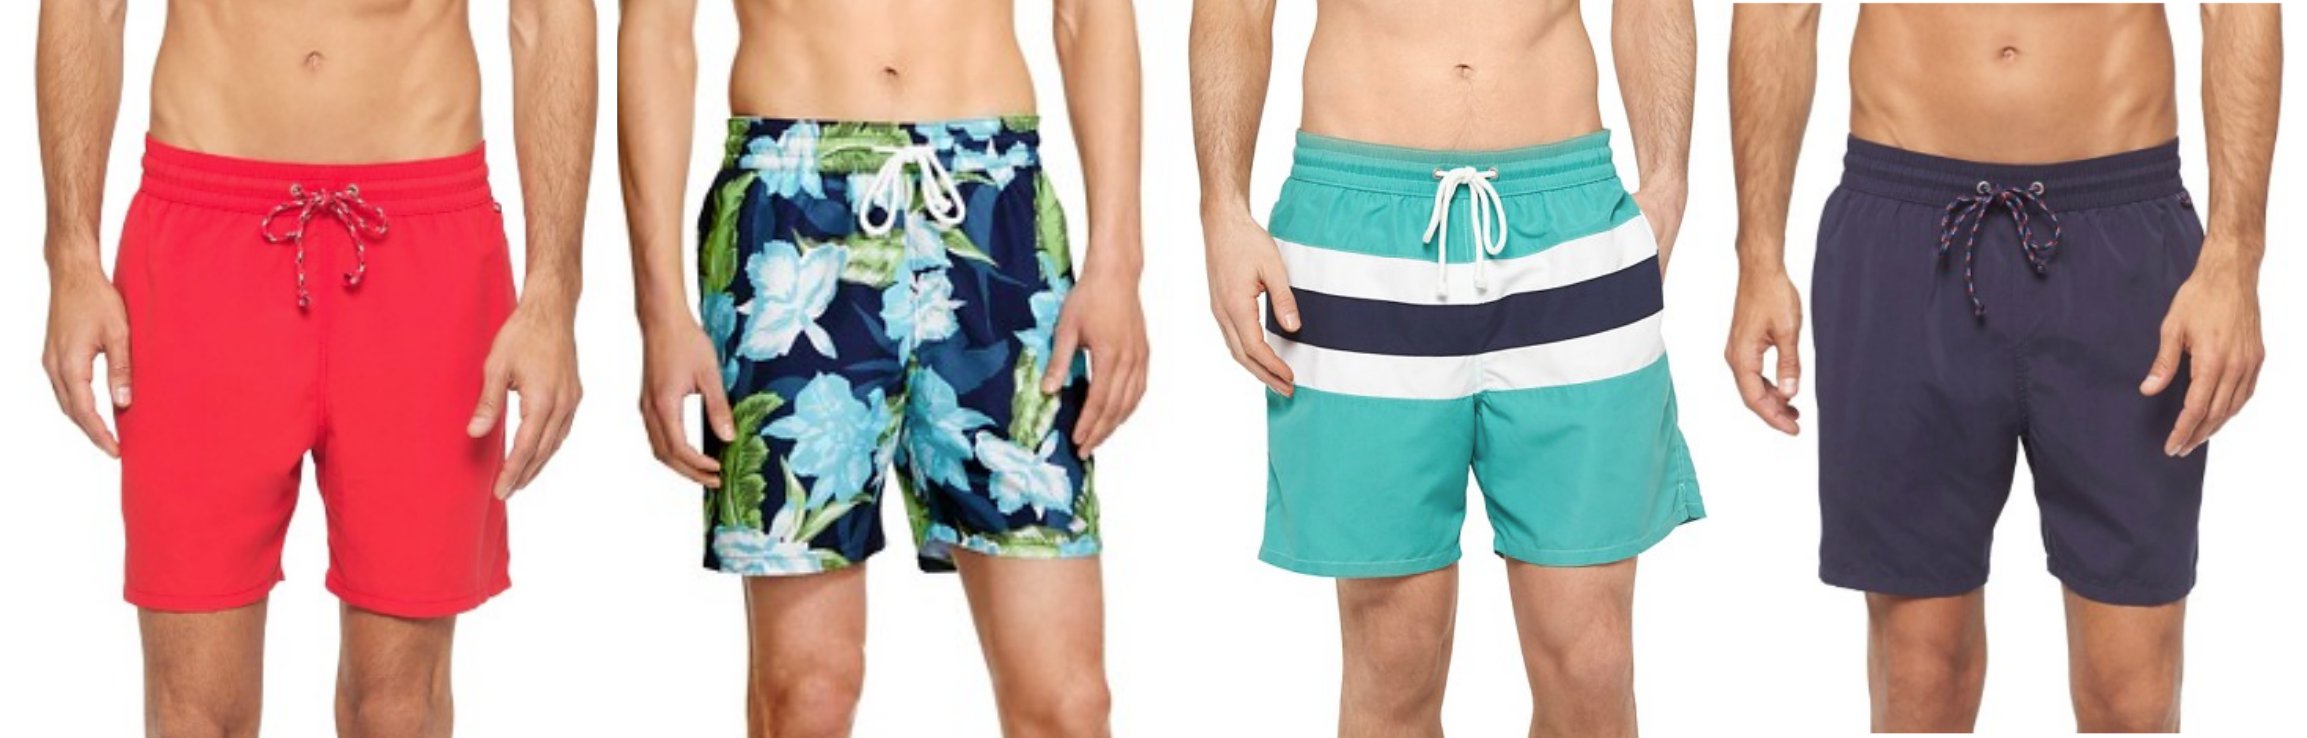 Target.com: Add'l 10% Off Men's Clearance Clothing = Swim Trunks Only ...